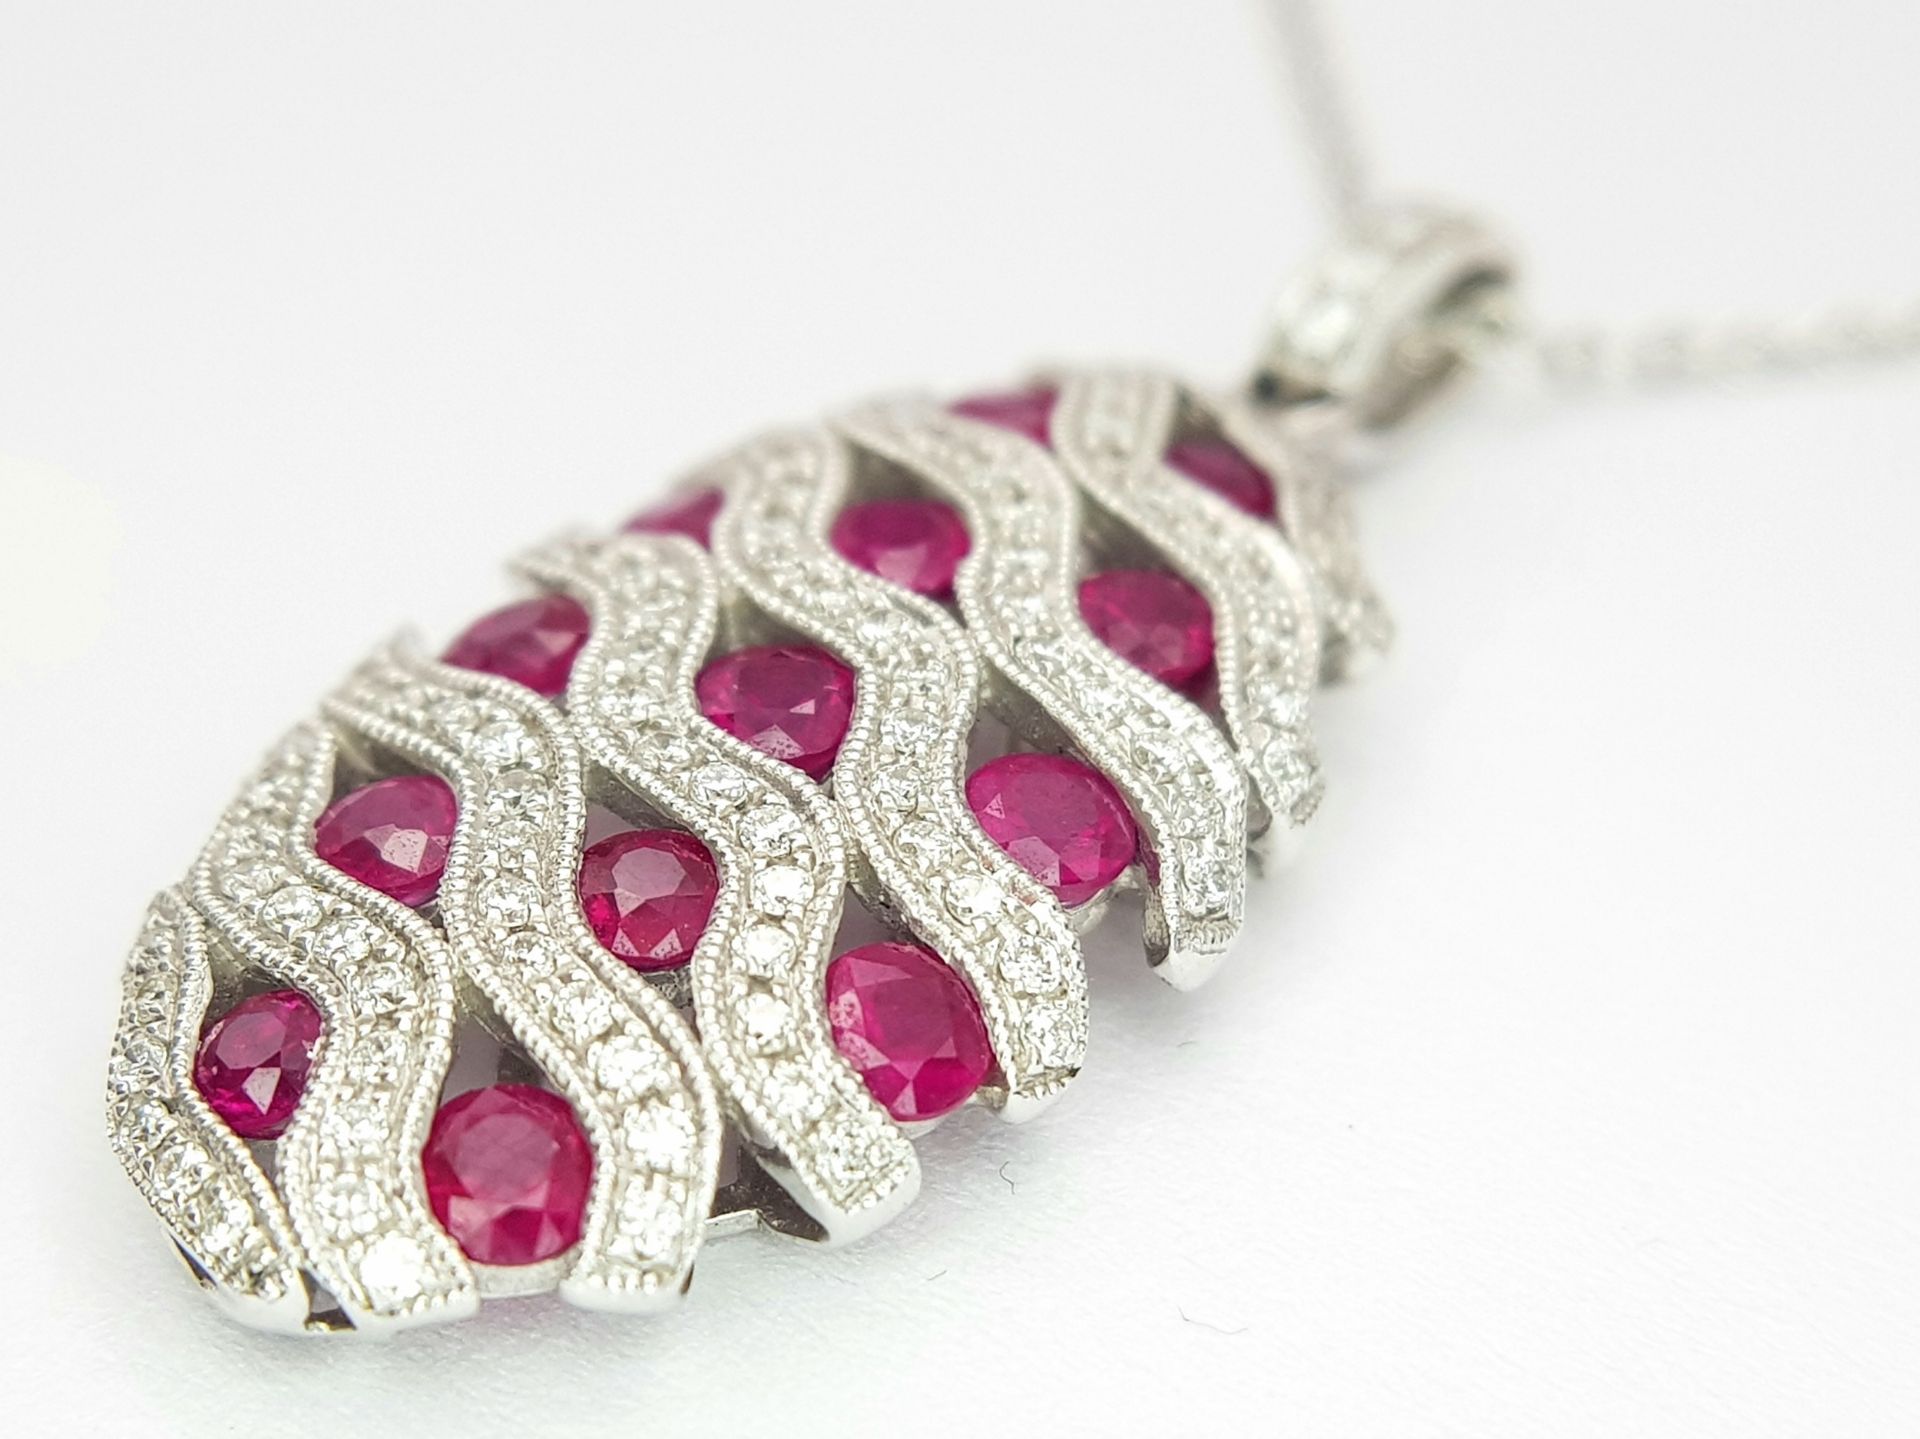 AN 18K WHITE GOLD DIAMOND AND RUBY PENDANT - 0.49CT OF DIAMONDS AND 2.29CT OF RUBIES. 6.2G WEIGHT. - Image 7 of 16